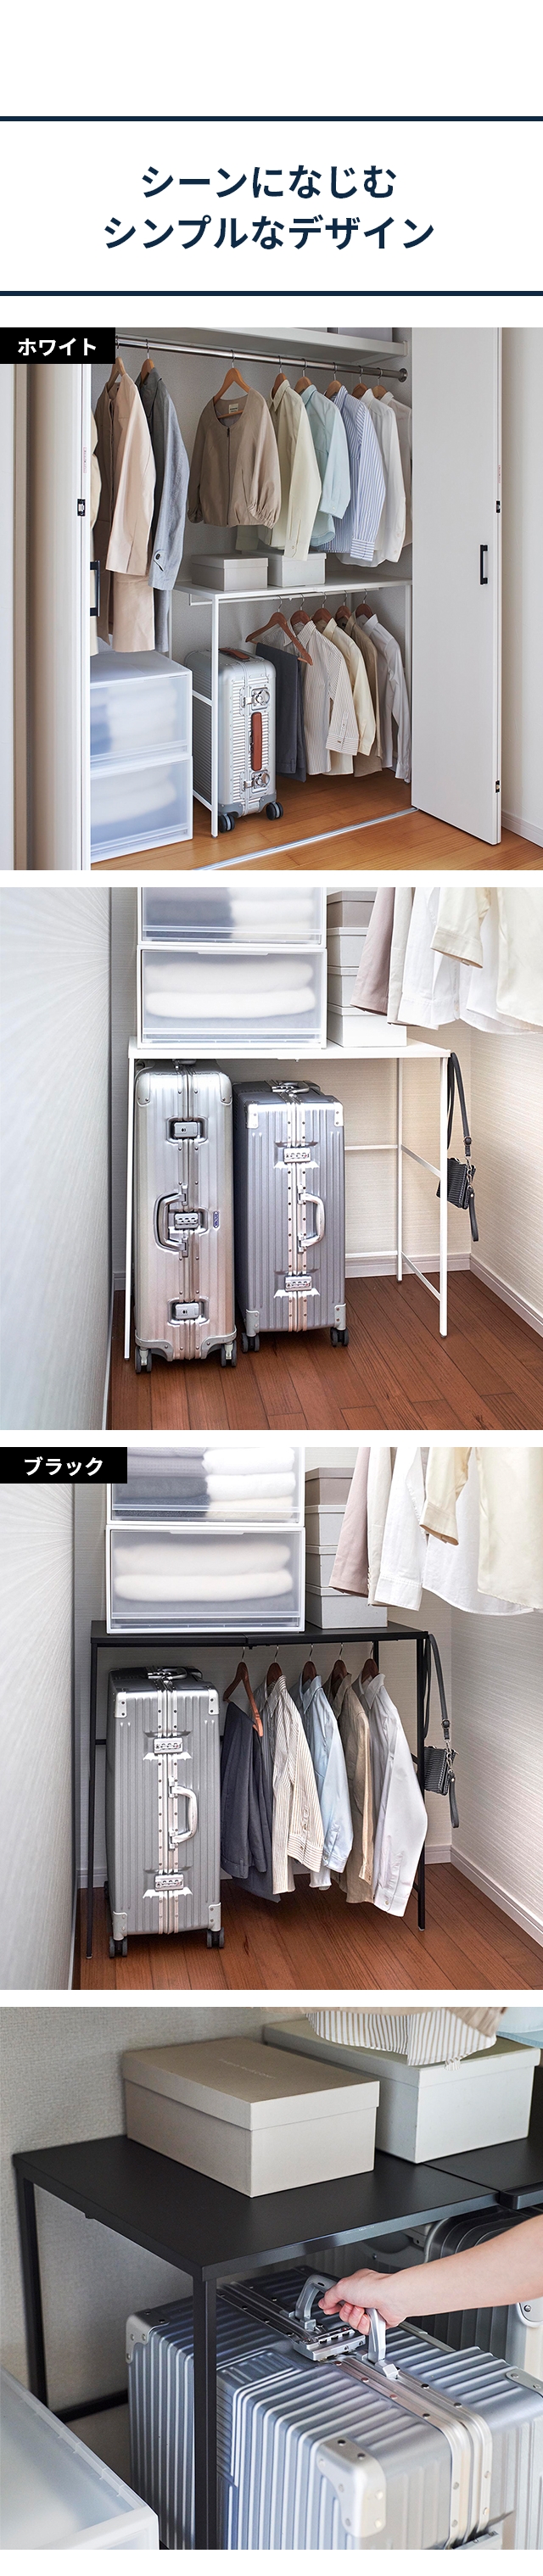 tower（タワー） 伸縮キャリーケース上ラック Tower Expandable Suitcase